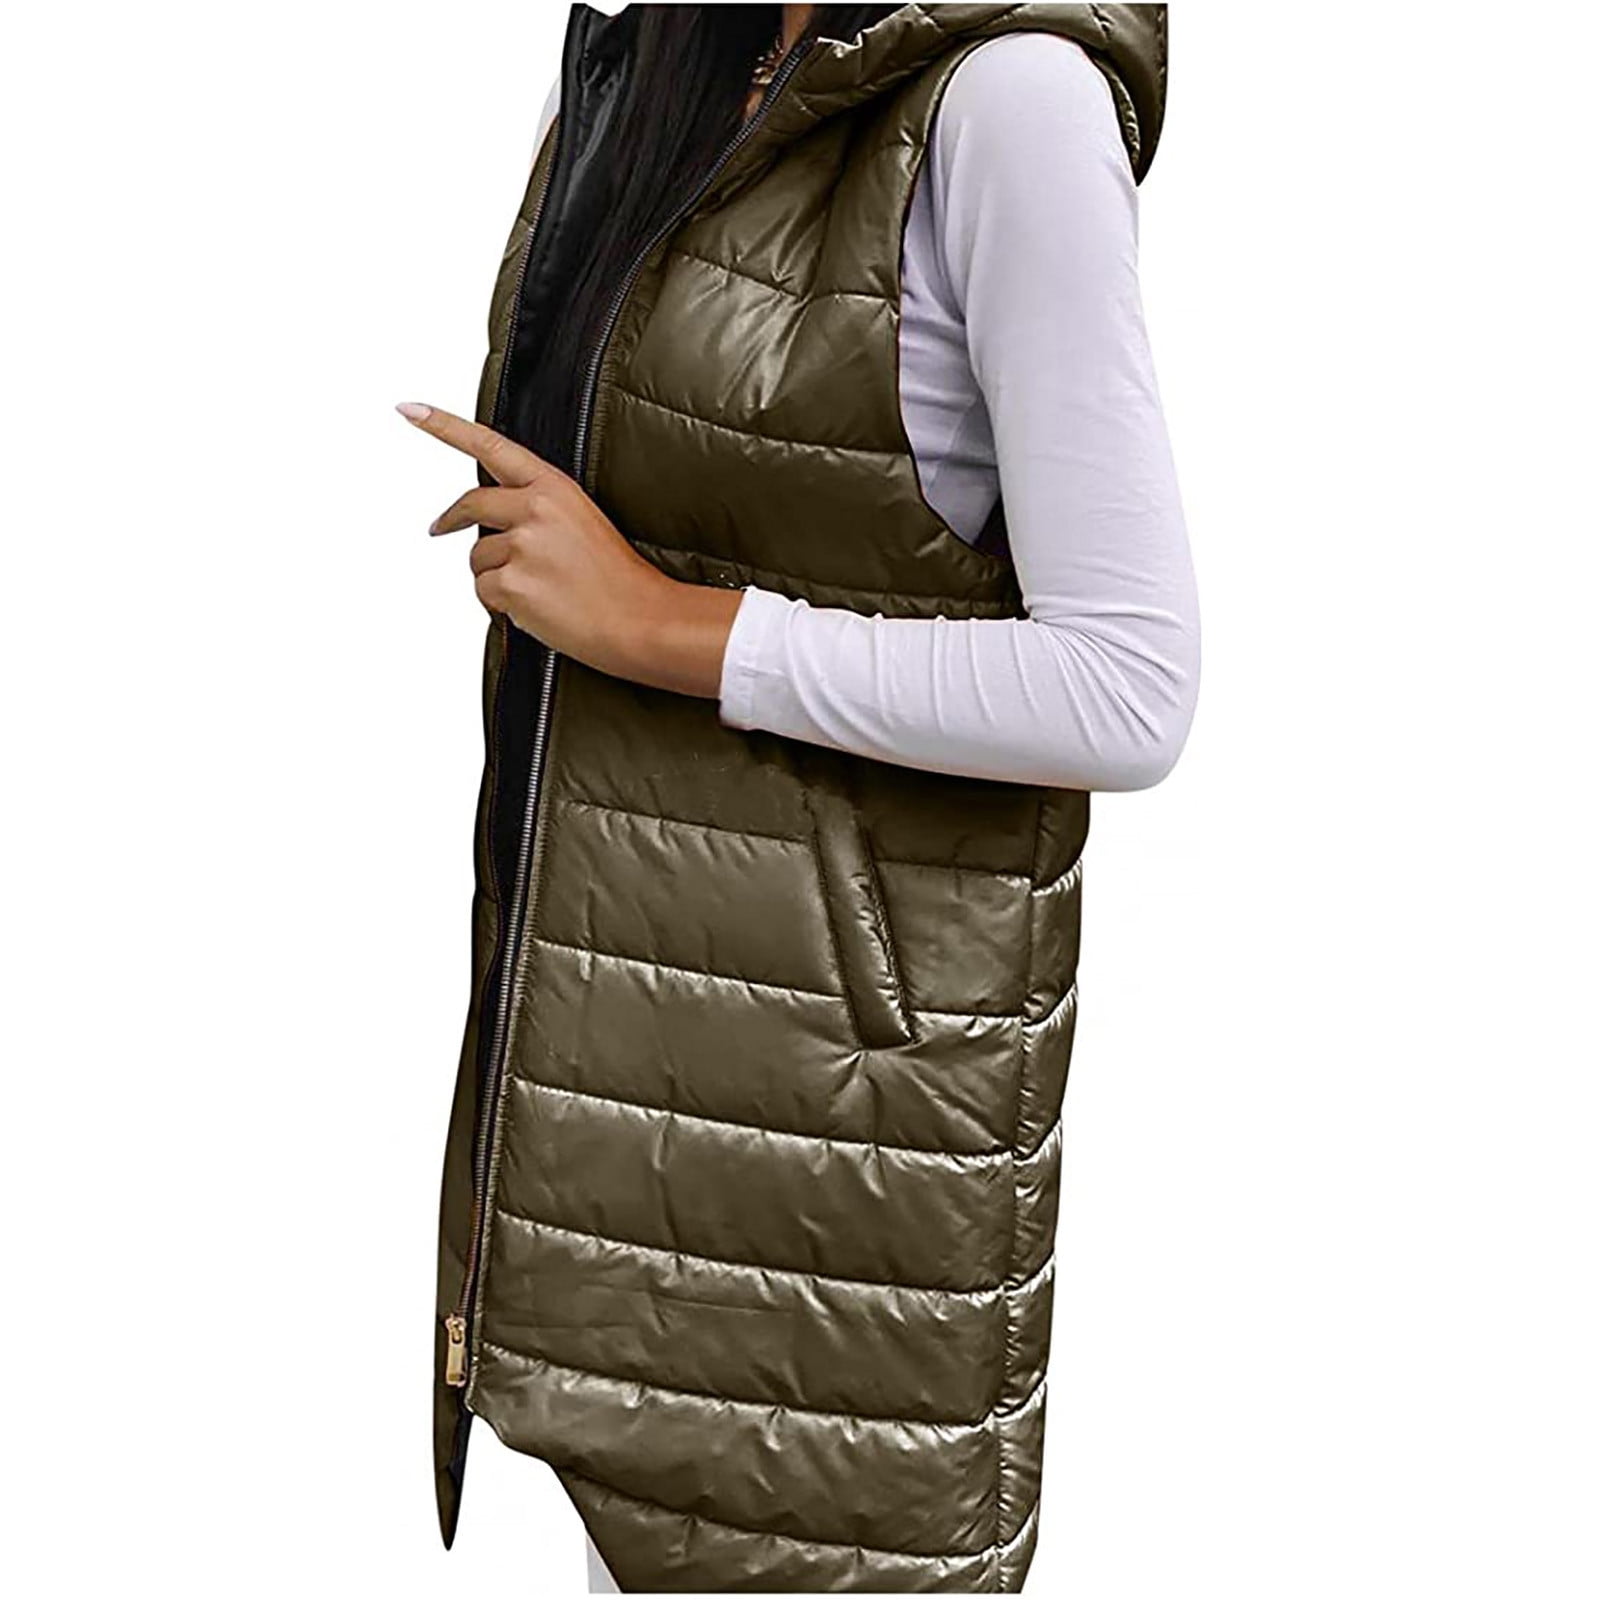 Long Down Hooded Vest For Women Lightweight Sleeveless Puffer Down Jacket  For Winter Solid Color Zipper Gilet Jacket With Pocket 